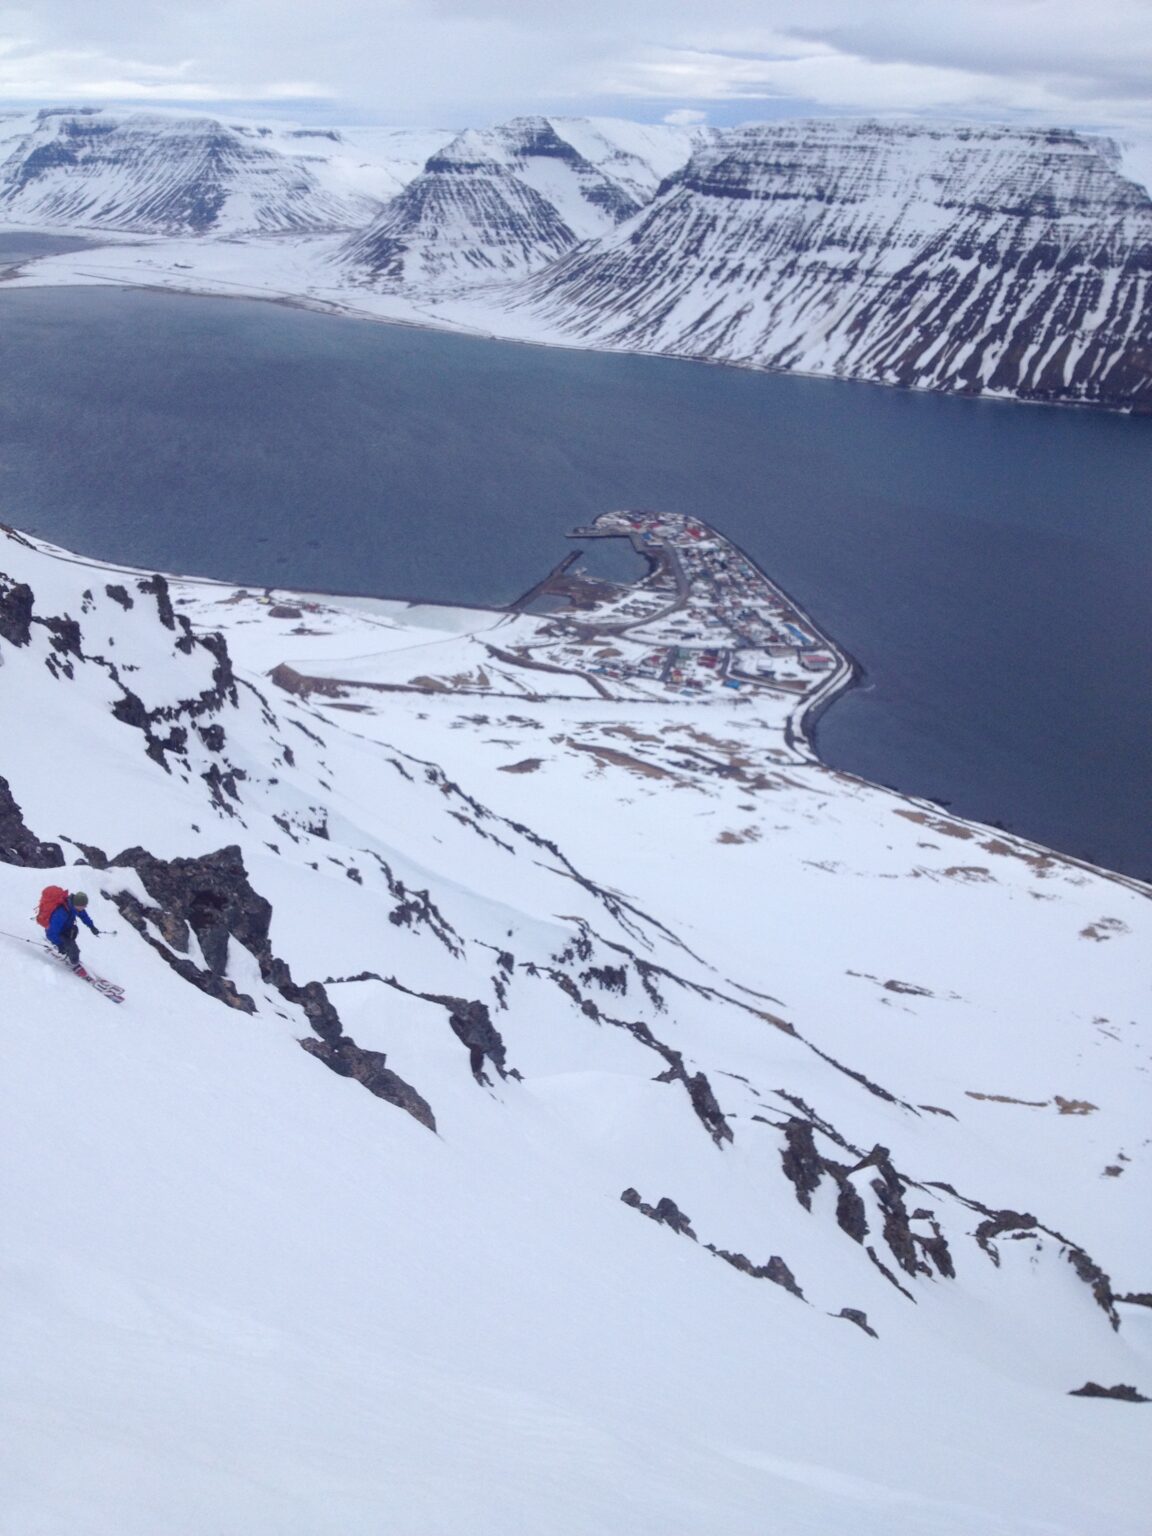 Checking out the snow conditions in the South Couloir of Eyrarfjall